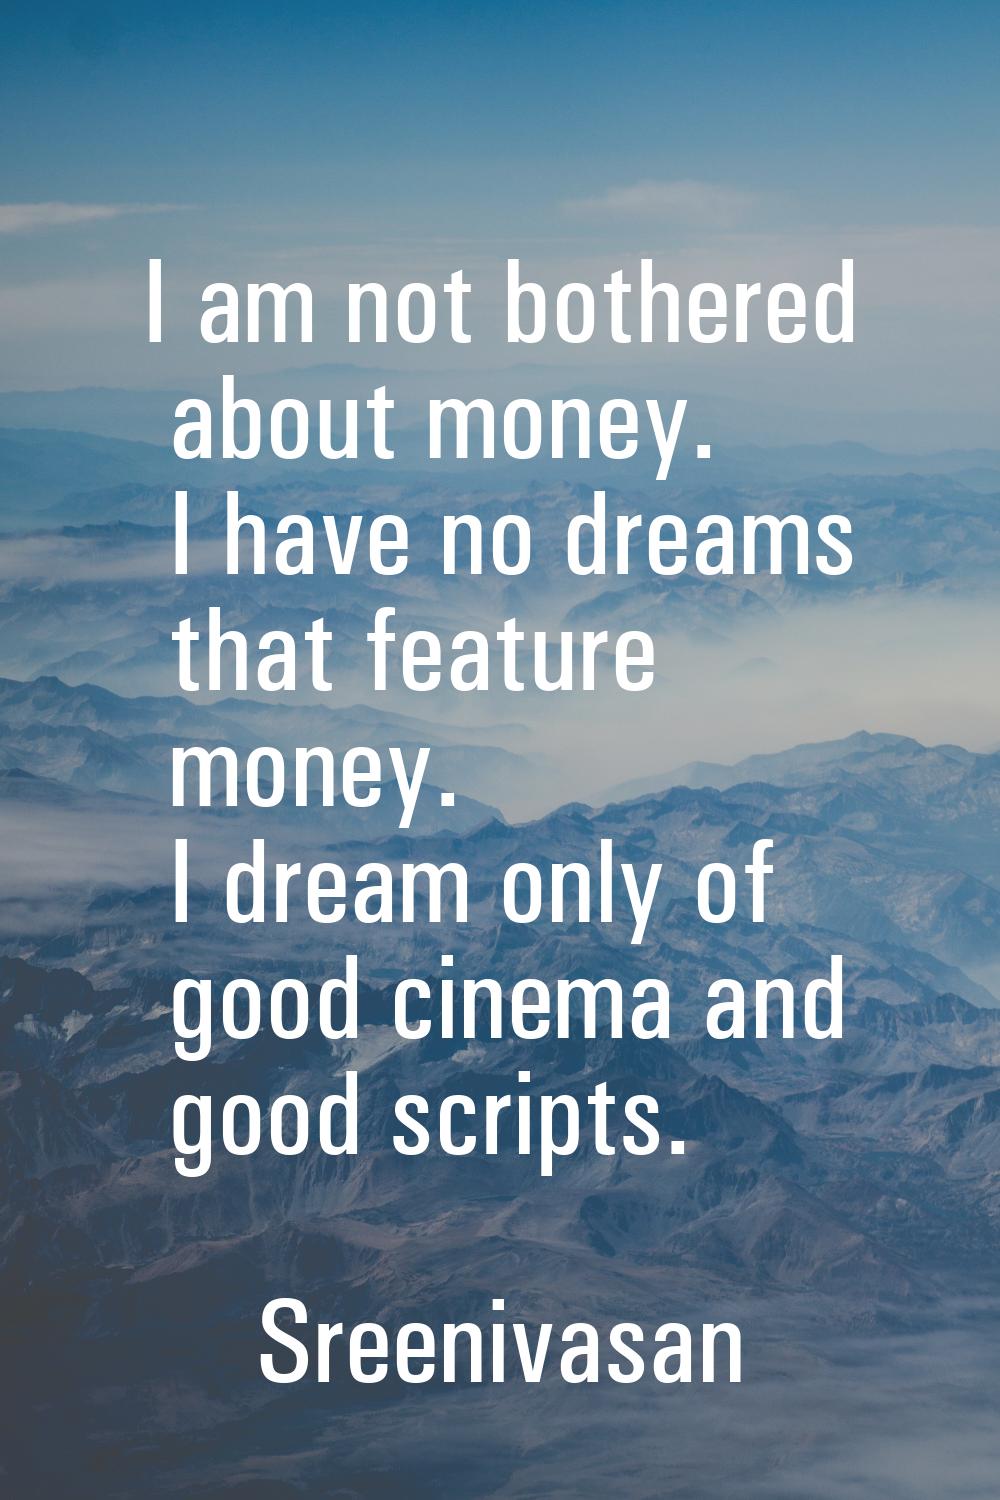 I am not bothered about money. I have no dreams that feature money. I dream only of good cinema and